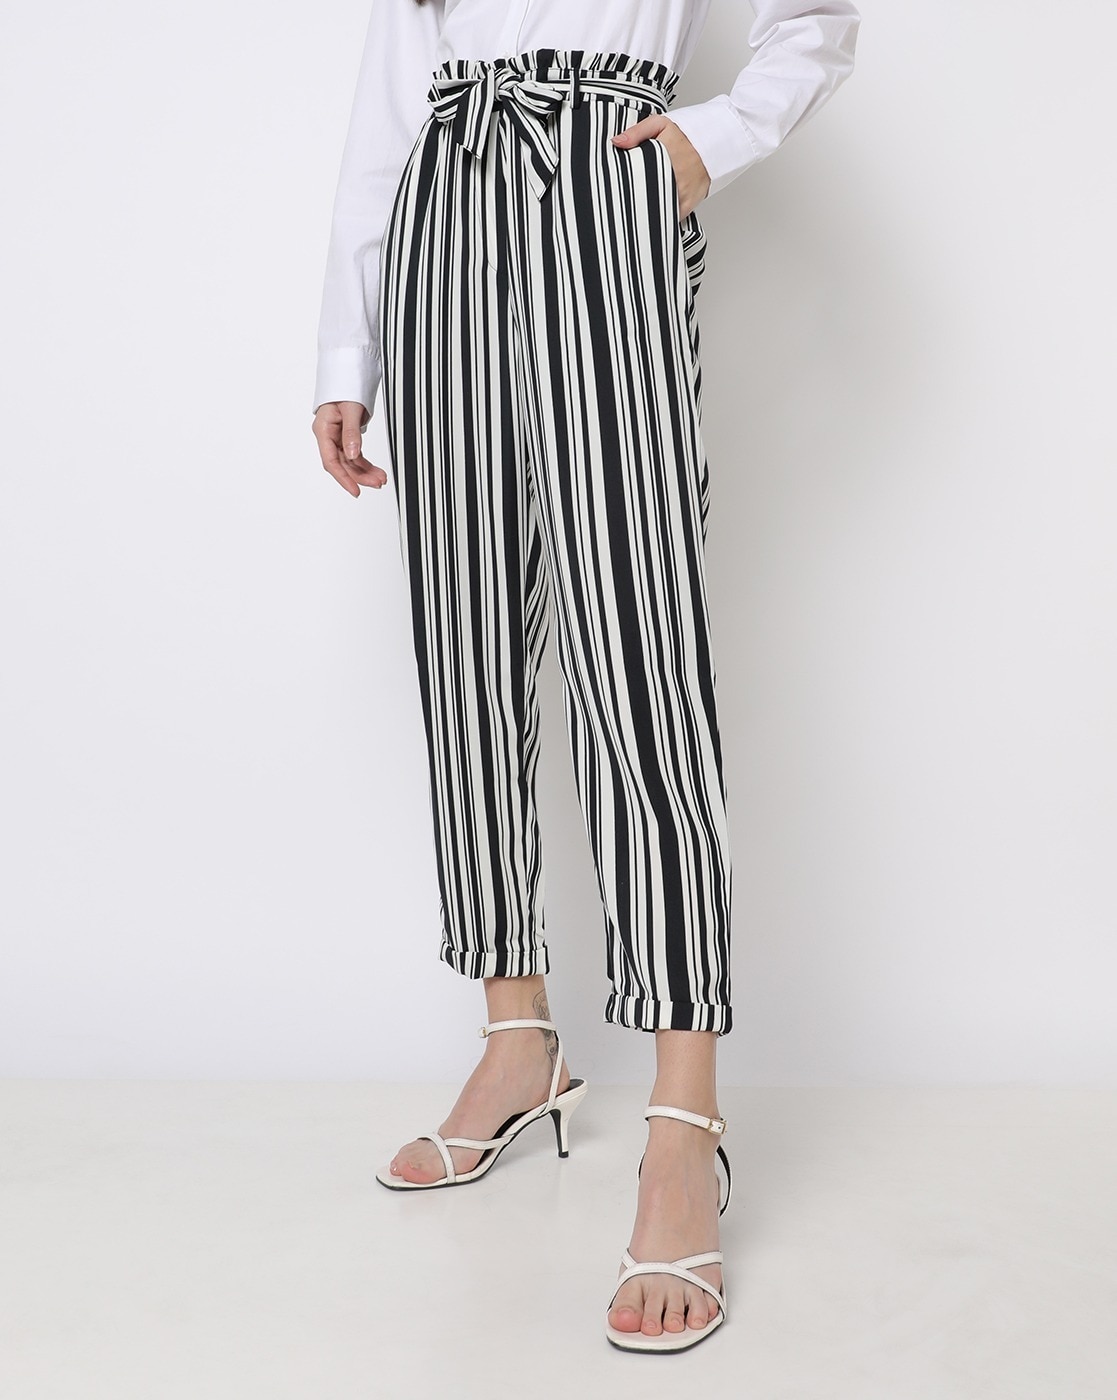 Buy Online Women Stylish Black Striped Volume Play Trousers at best price   Plussin